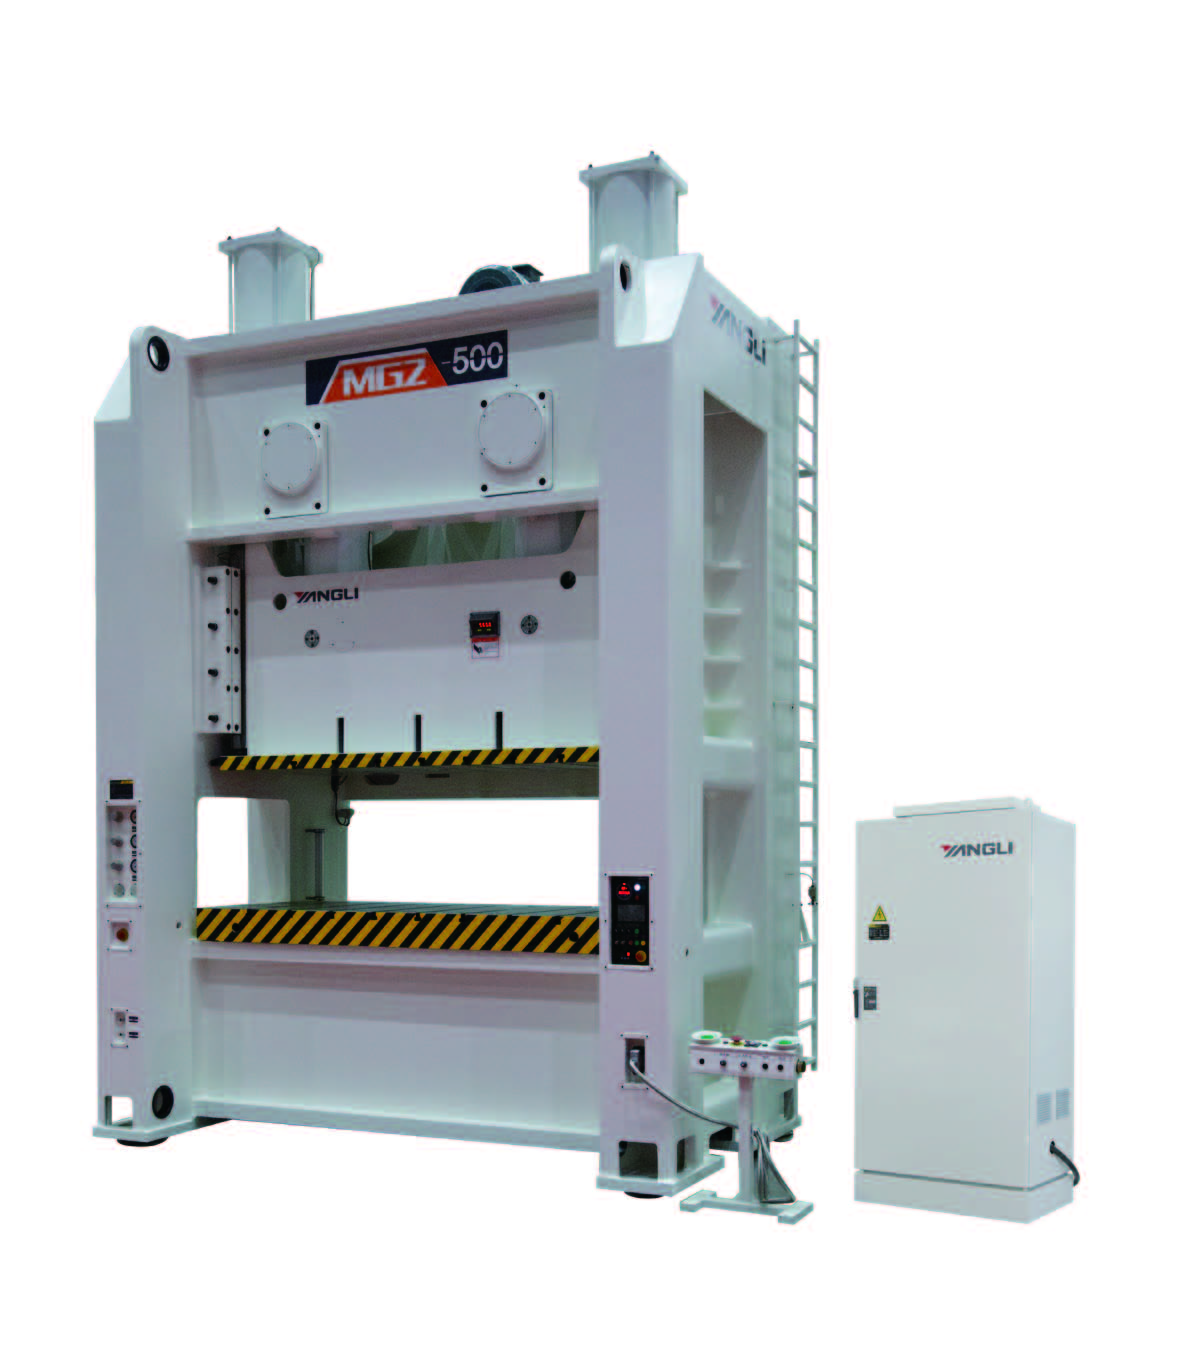 MG2 series gantry type two point press with high accuracy high performance